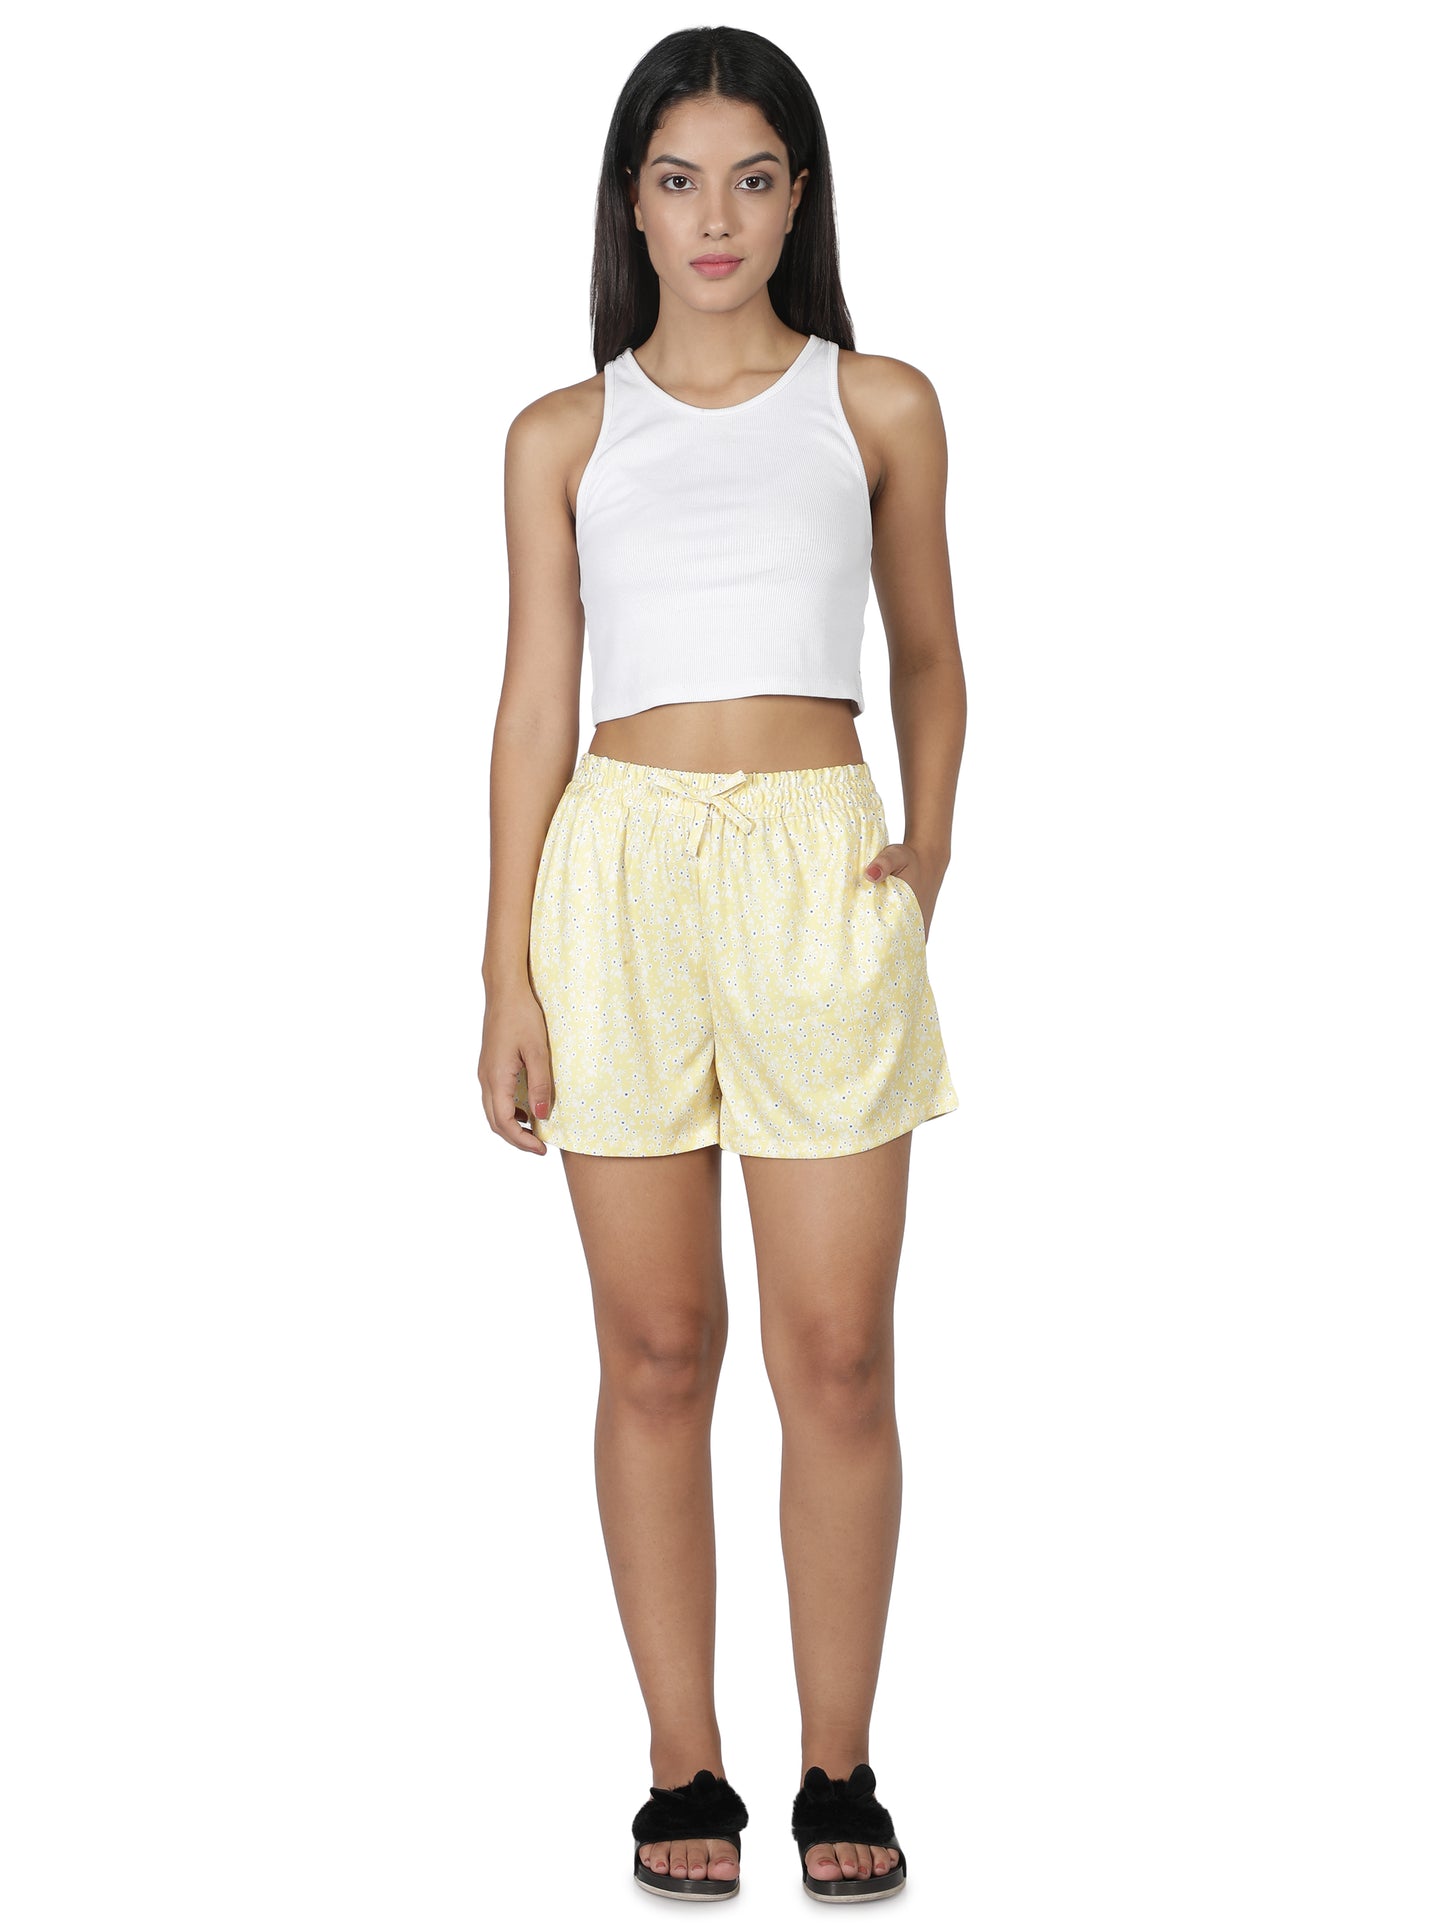 NUEVOSDAMAS Solid Cotton Jersey Printed Shorts for Women